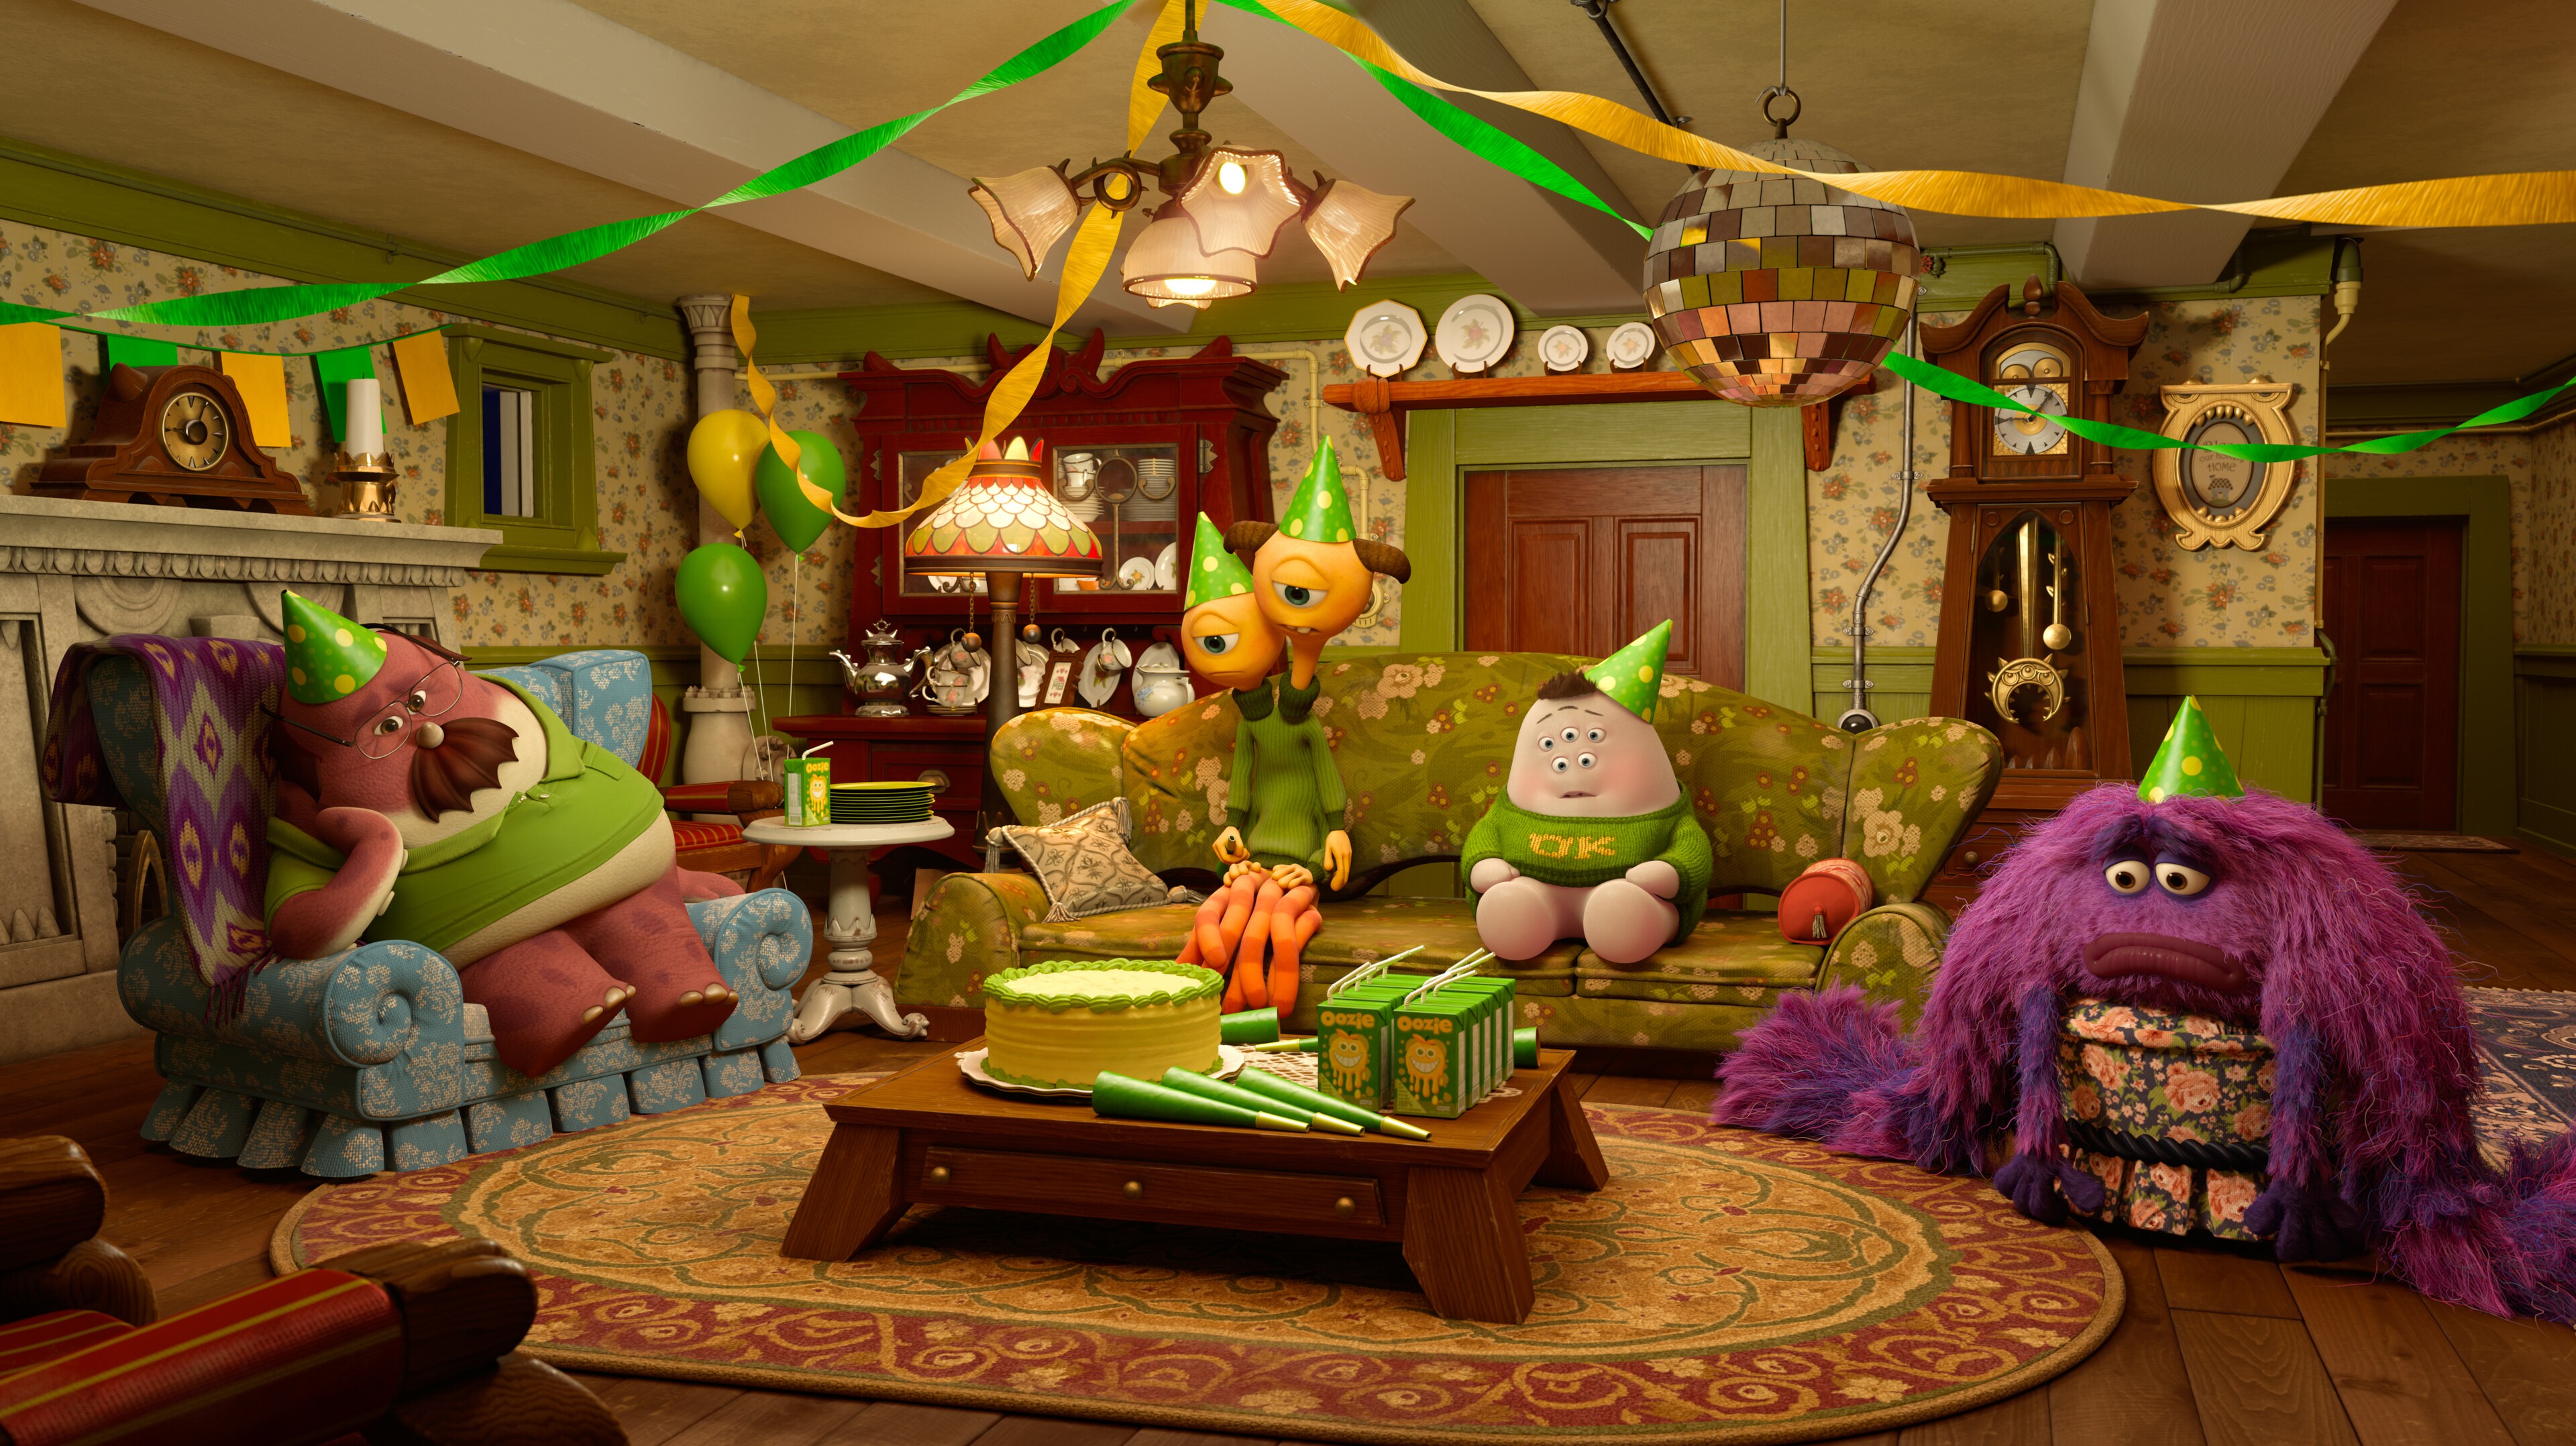 Mike (voiced by Billy Crystal), Sully (voiced by John Goodman), Terry (voiced by Dave Foley), Terri (voiced by Sean Hayes), Don (voiced by Joel Murray), and Squishy (voiced by Peter Sohn) in the Disney•Pixar movie Party Central.